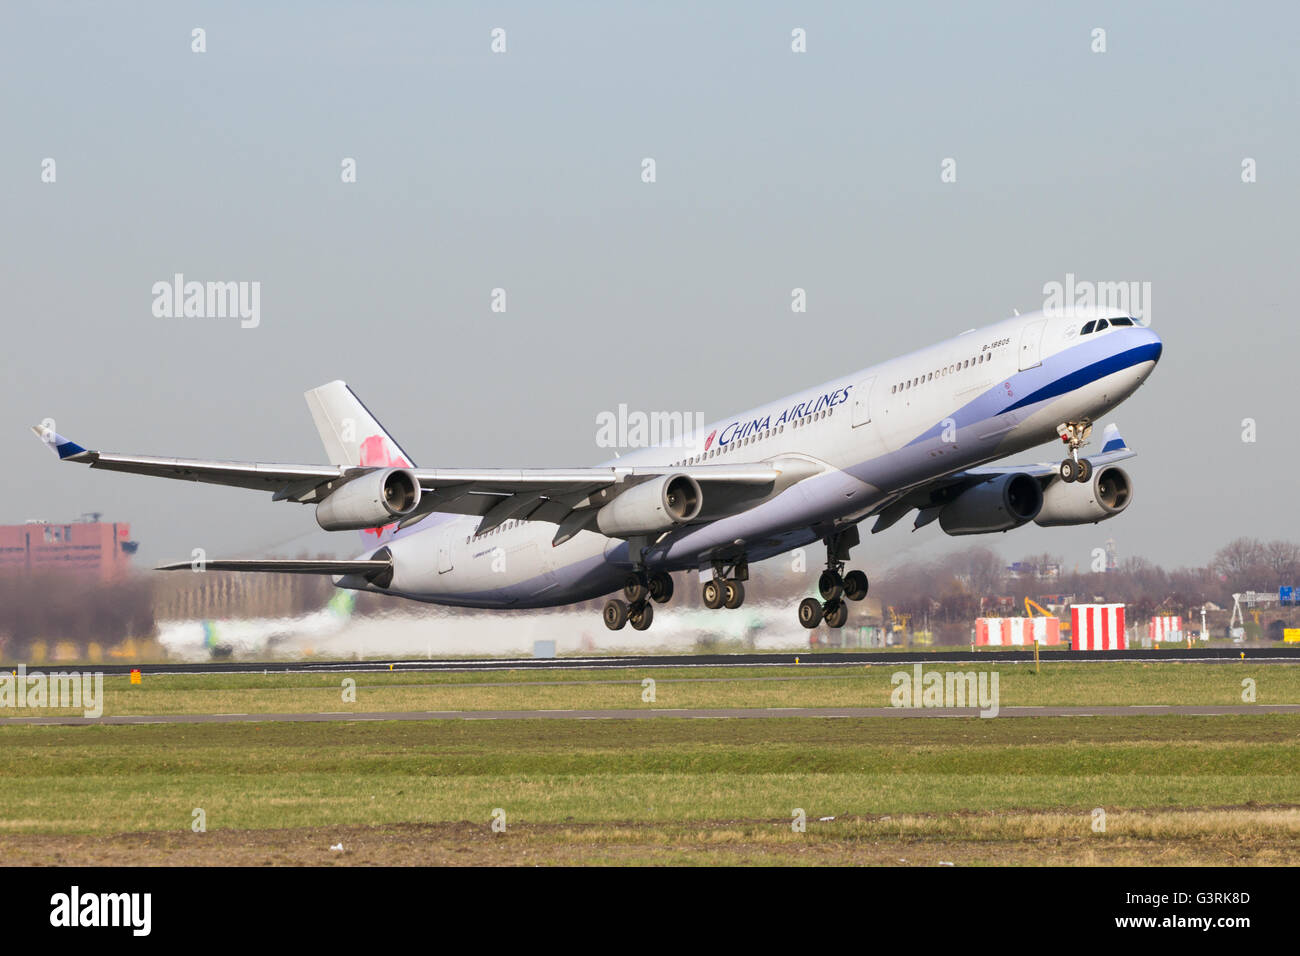 China Airlines Airbus A340-313 take-off from Schiphol airport Stock Photo